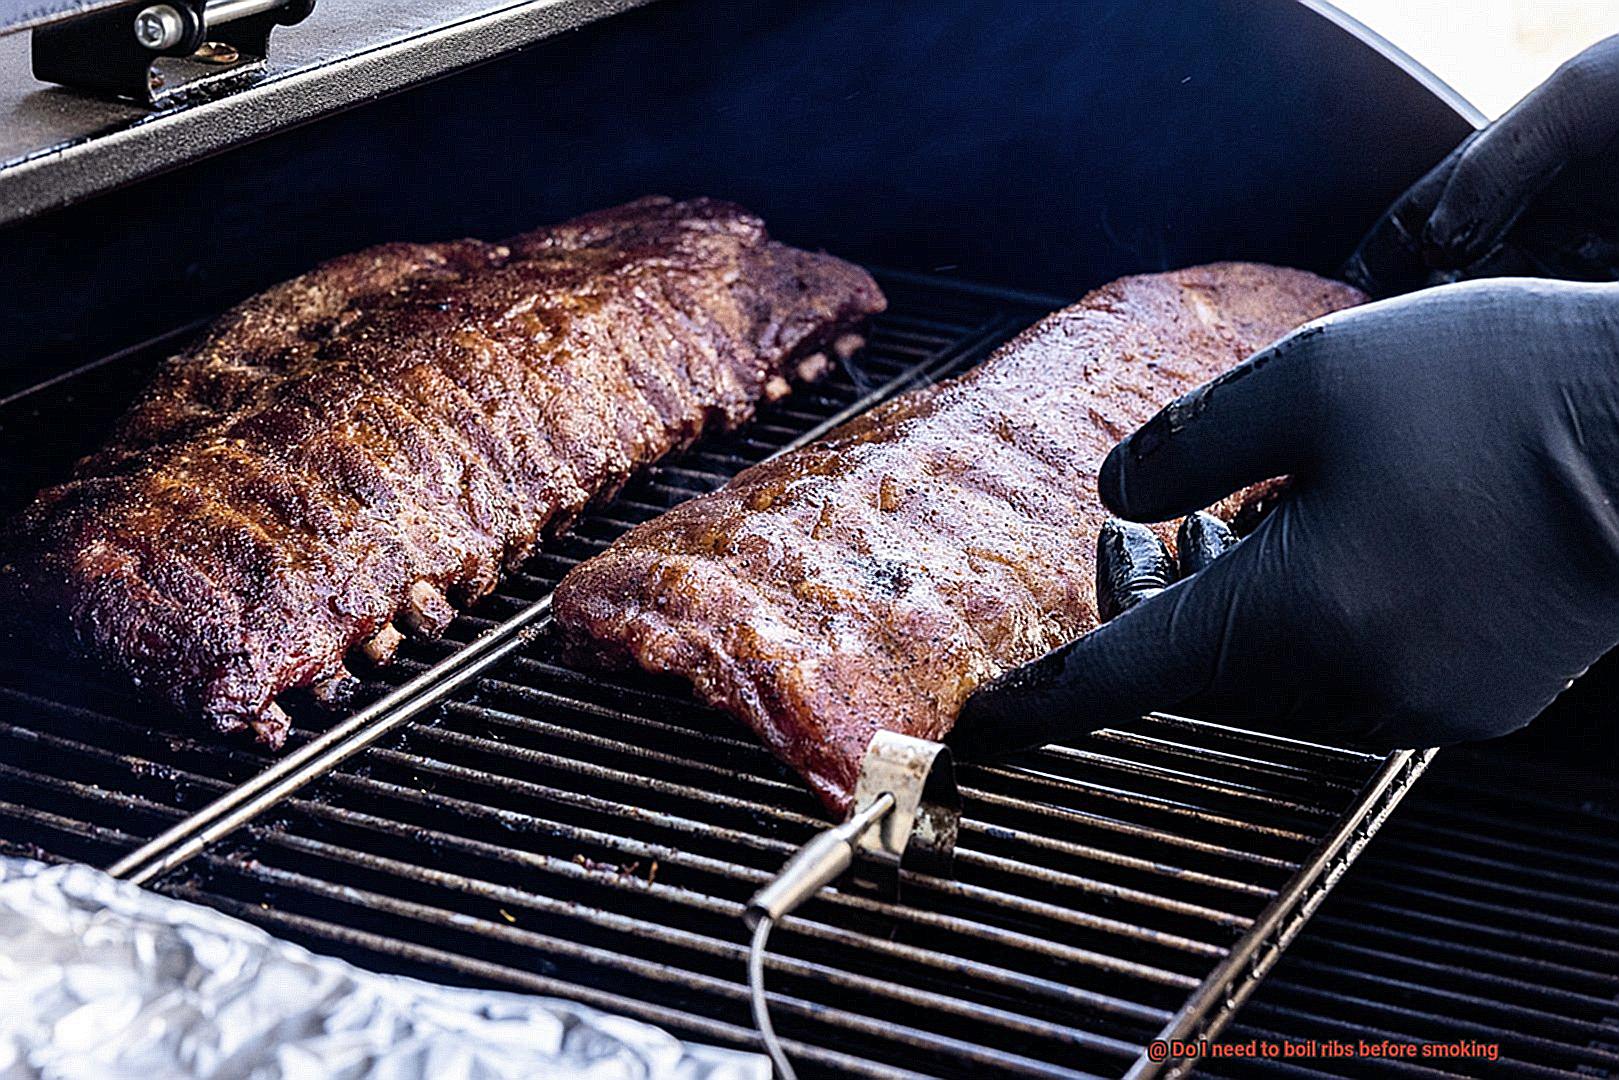 Do I need to boil ribs before smoking-5